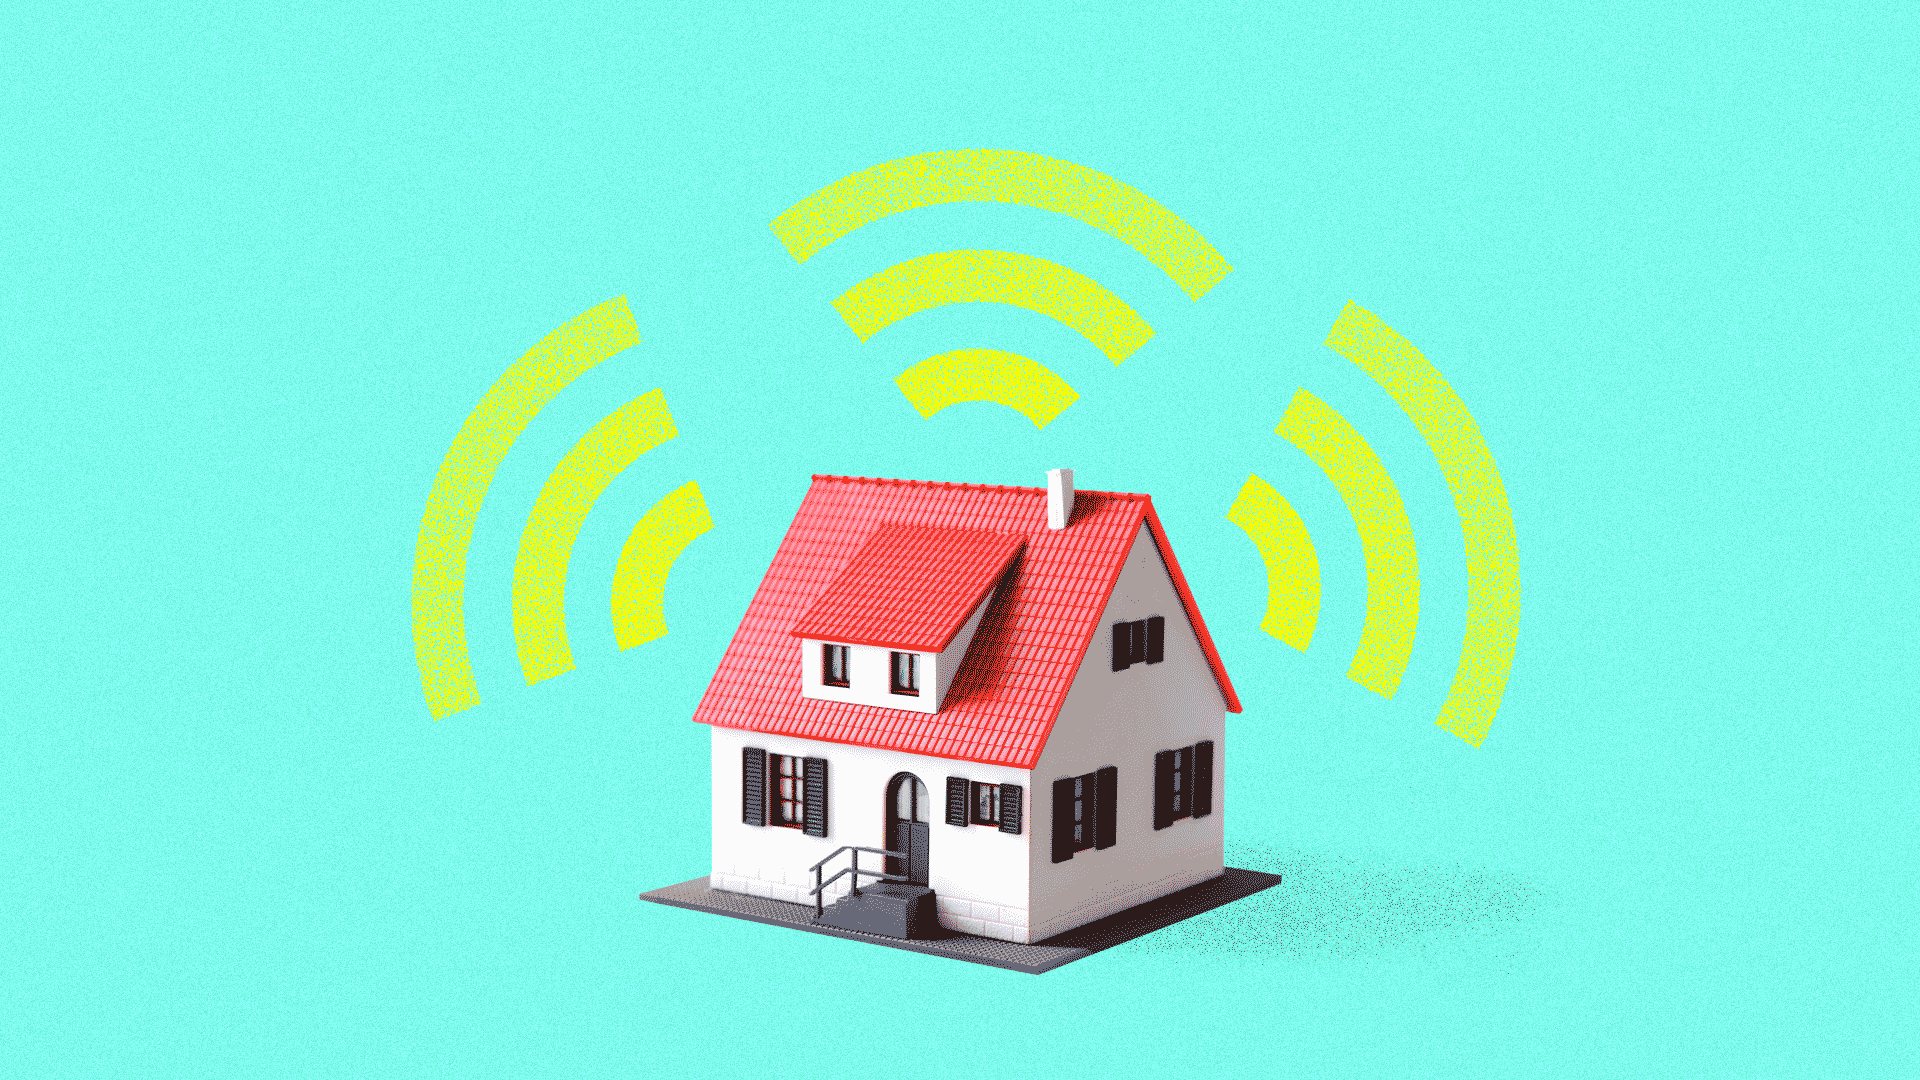 A truly smart home needs to be more than just connected